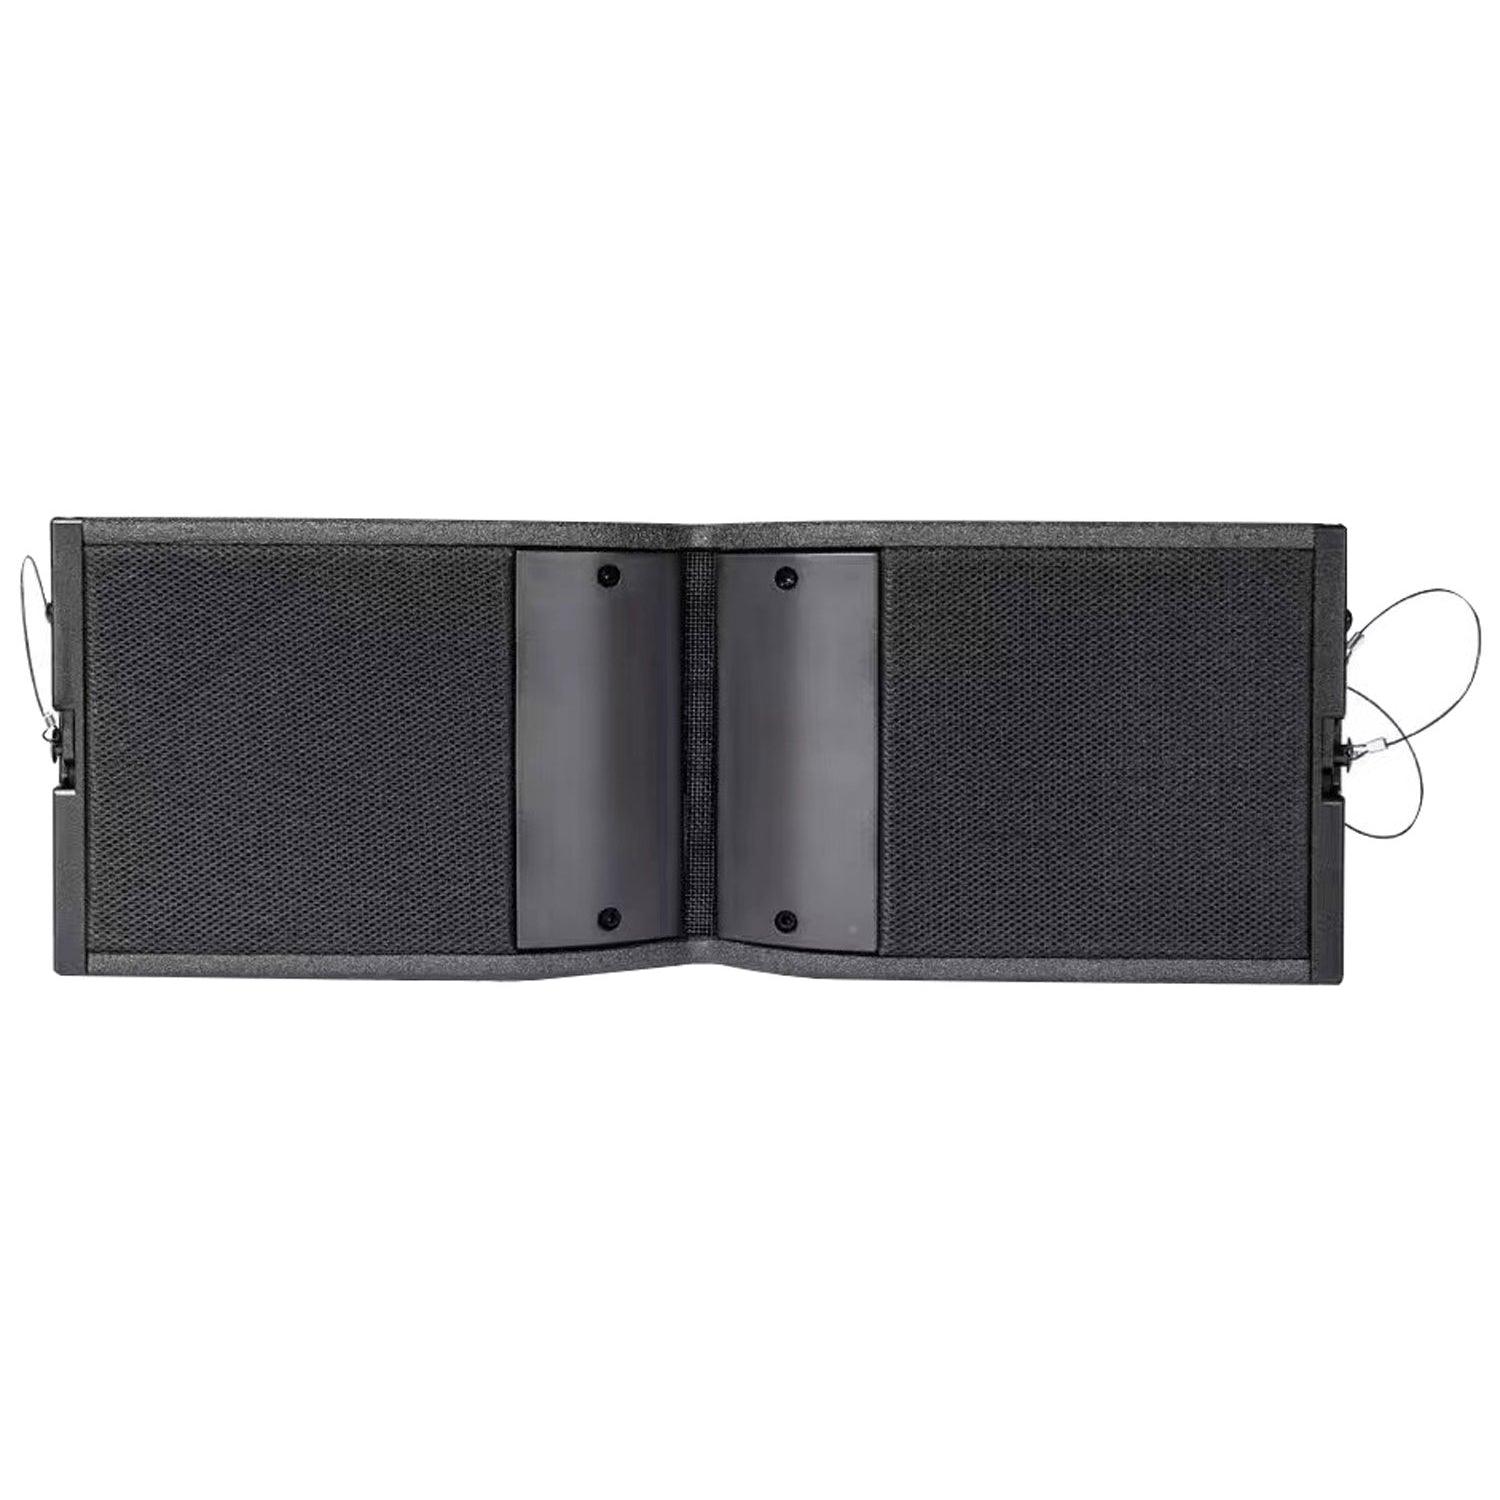 Citronic C-208 Array Cab 2 x 8in + HF 600Wrms Line Array Speakers - DY Pro Audio